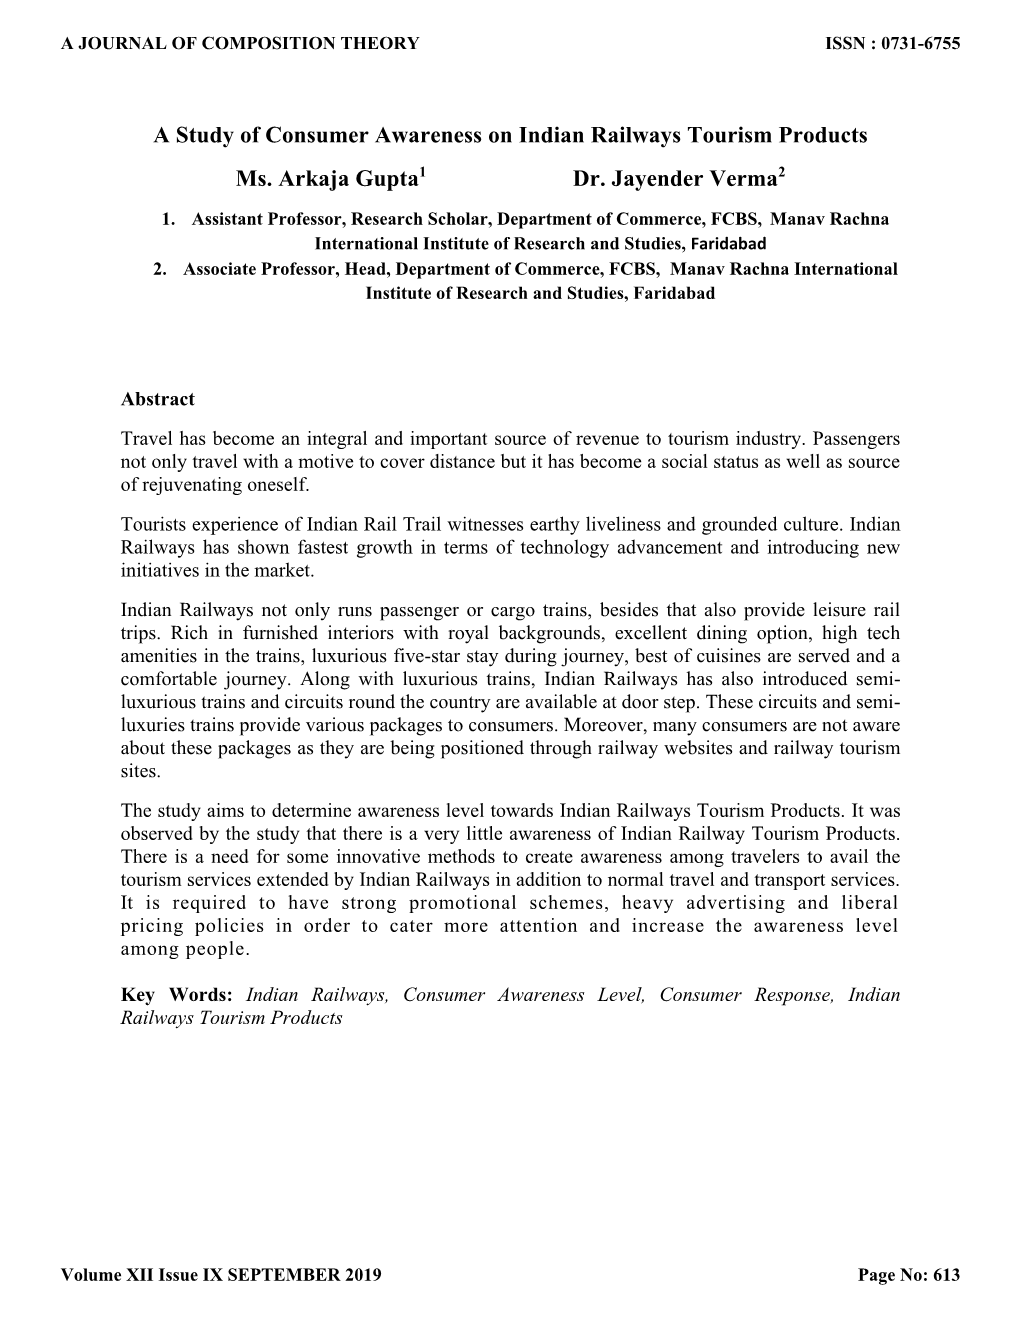 A Study of Consumer Awareness on Indian Railways Tourism Products Ms